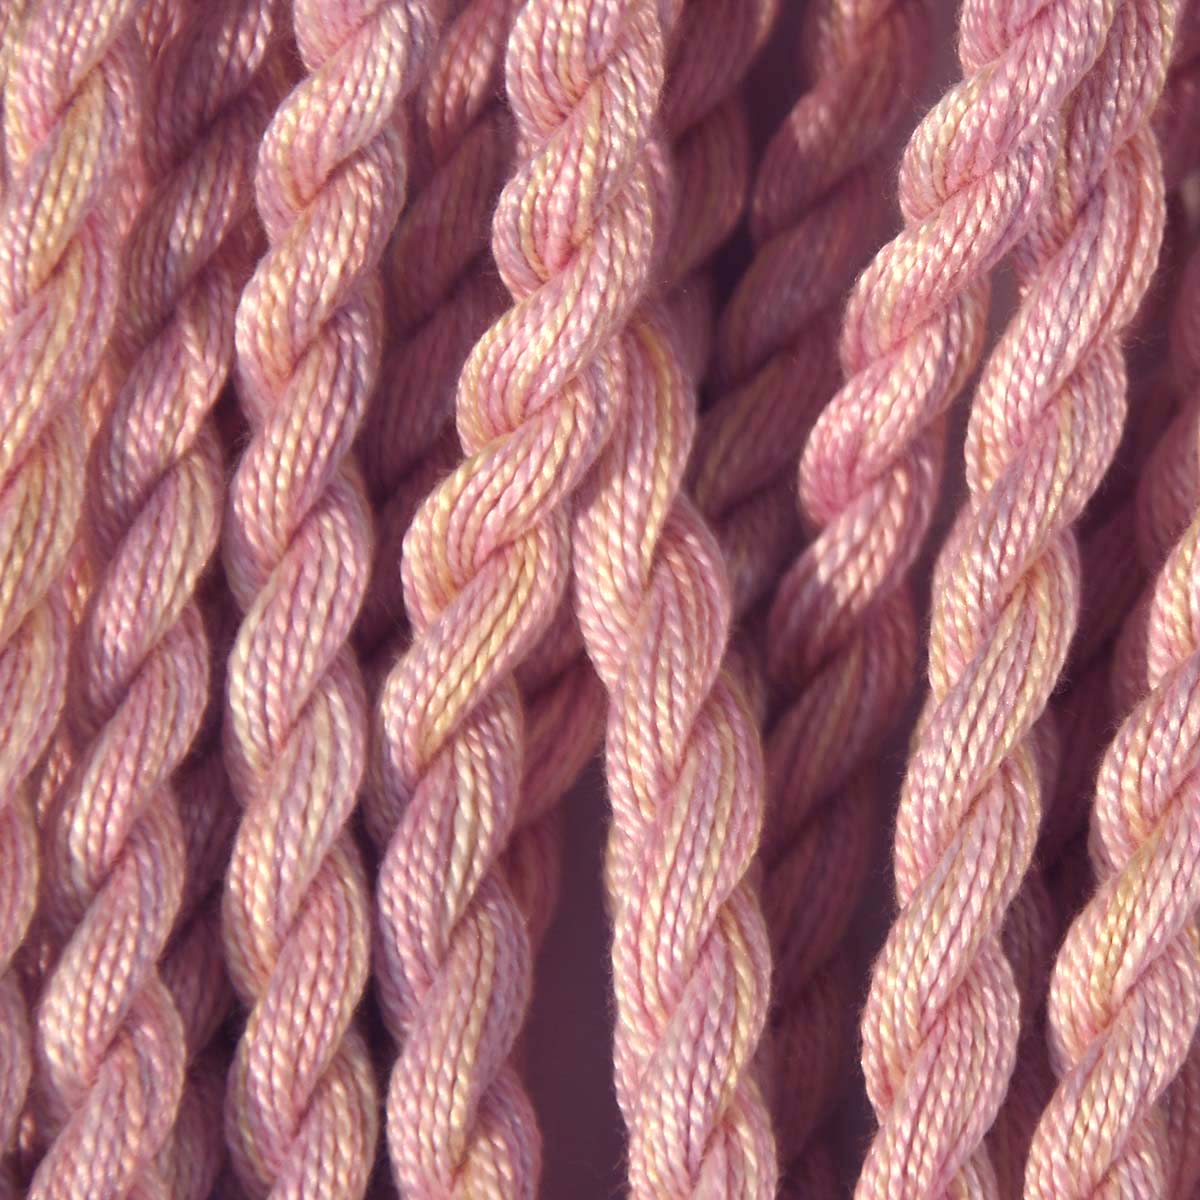 www.colourstreams.com.au Colour Streams Hand Dyed Cotton Threads Cotto Strands Slow Stitch Embroidery Textile Arts Fibre DL 12 Dawn Pinks Purples Yellows 